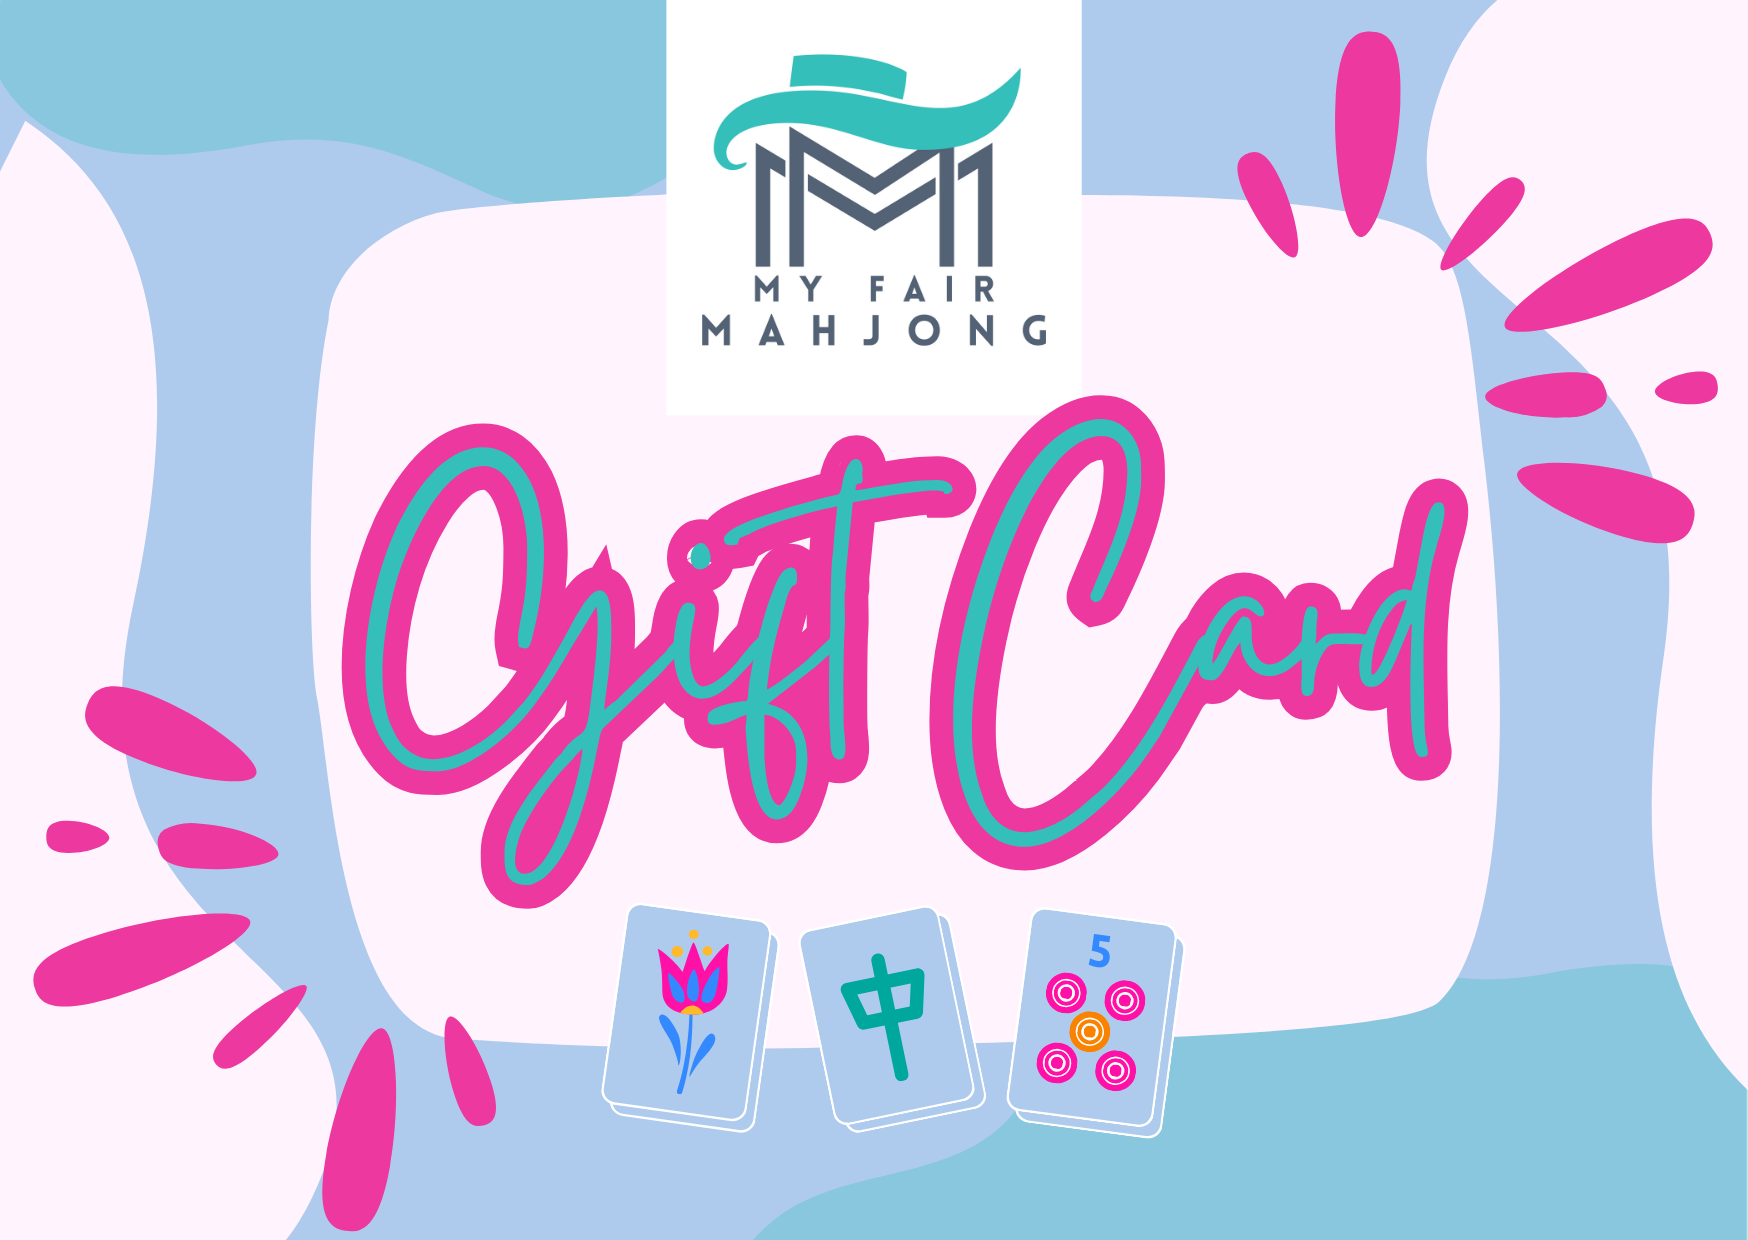 My Fair Mahjong Gift Card for Colorful and Fun Mahjong Tile Sets Accessories and Gifts